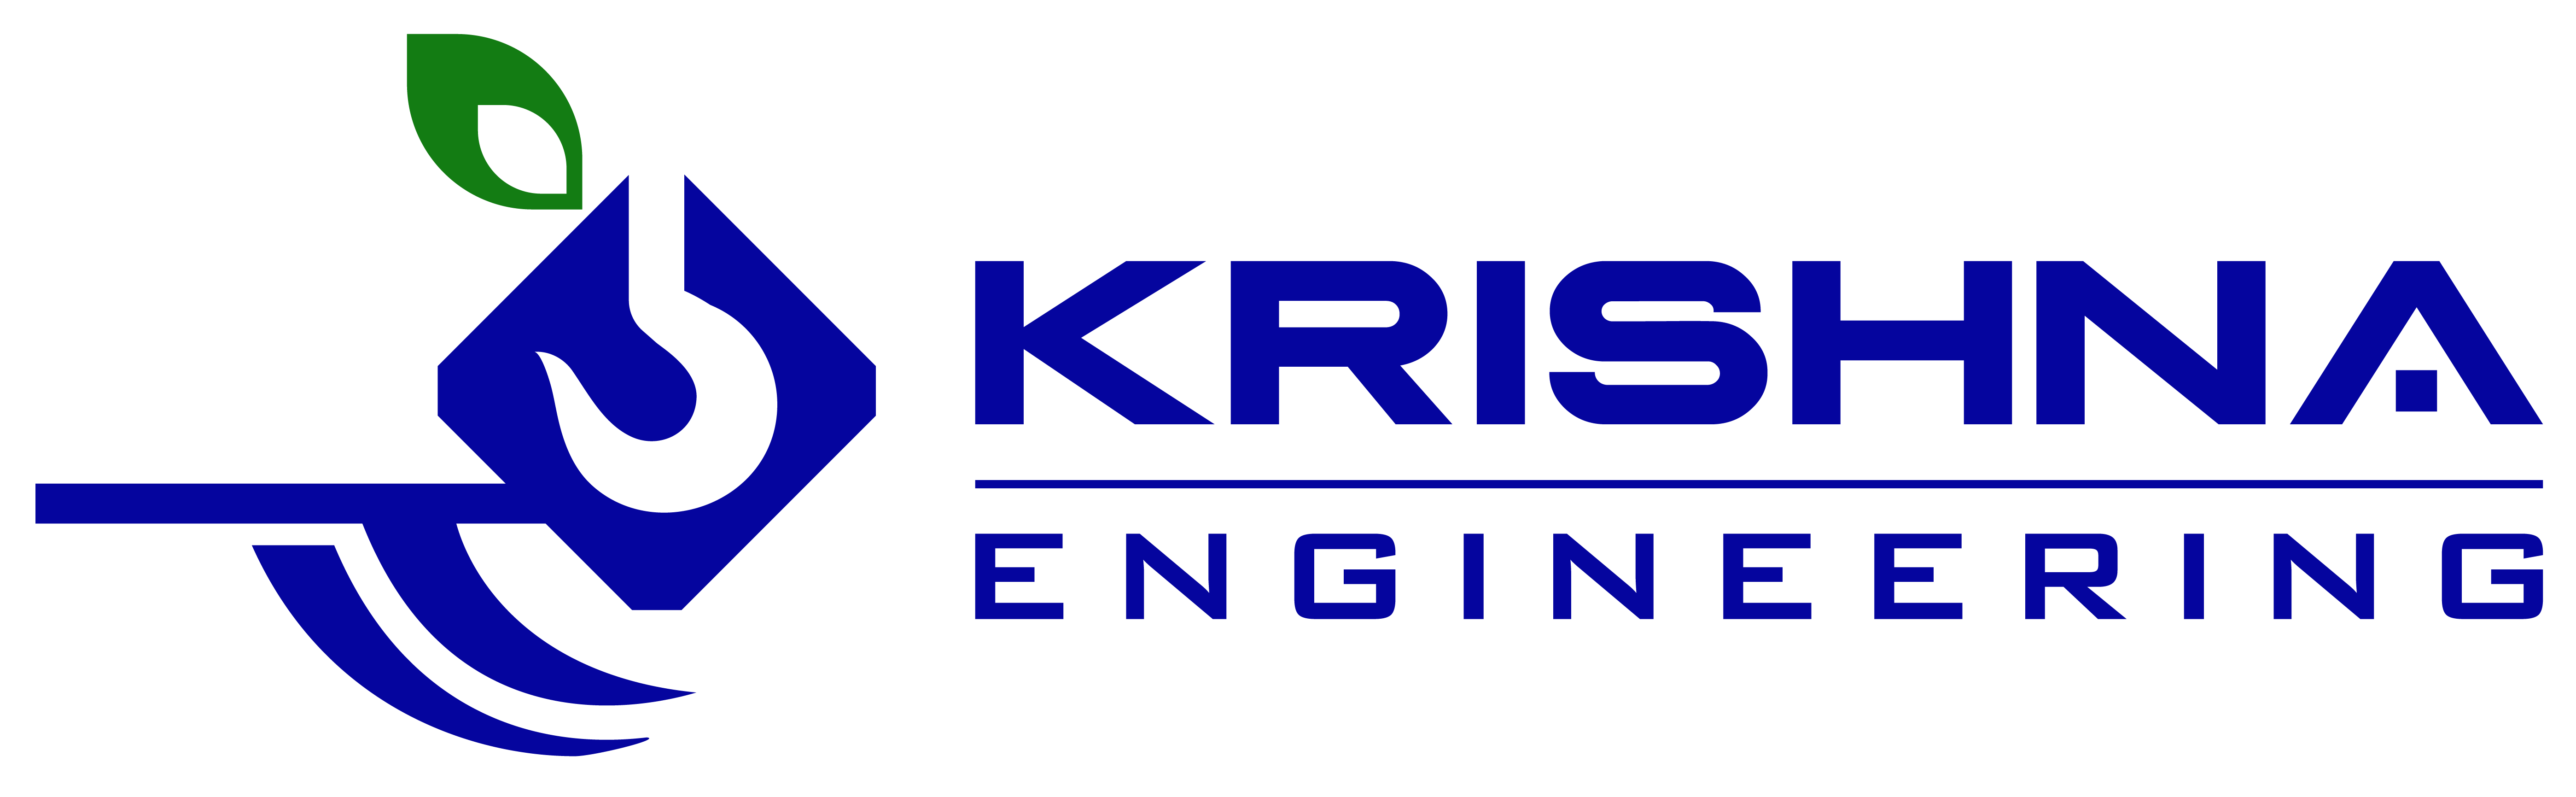 Krishna Engineering | Leading Manufacturer of EOT Cranes, Hoists, and Goods Lifts